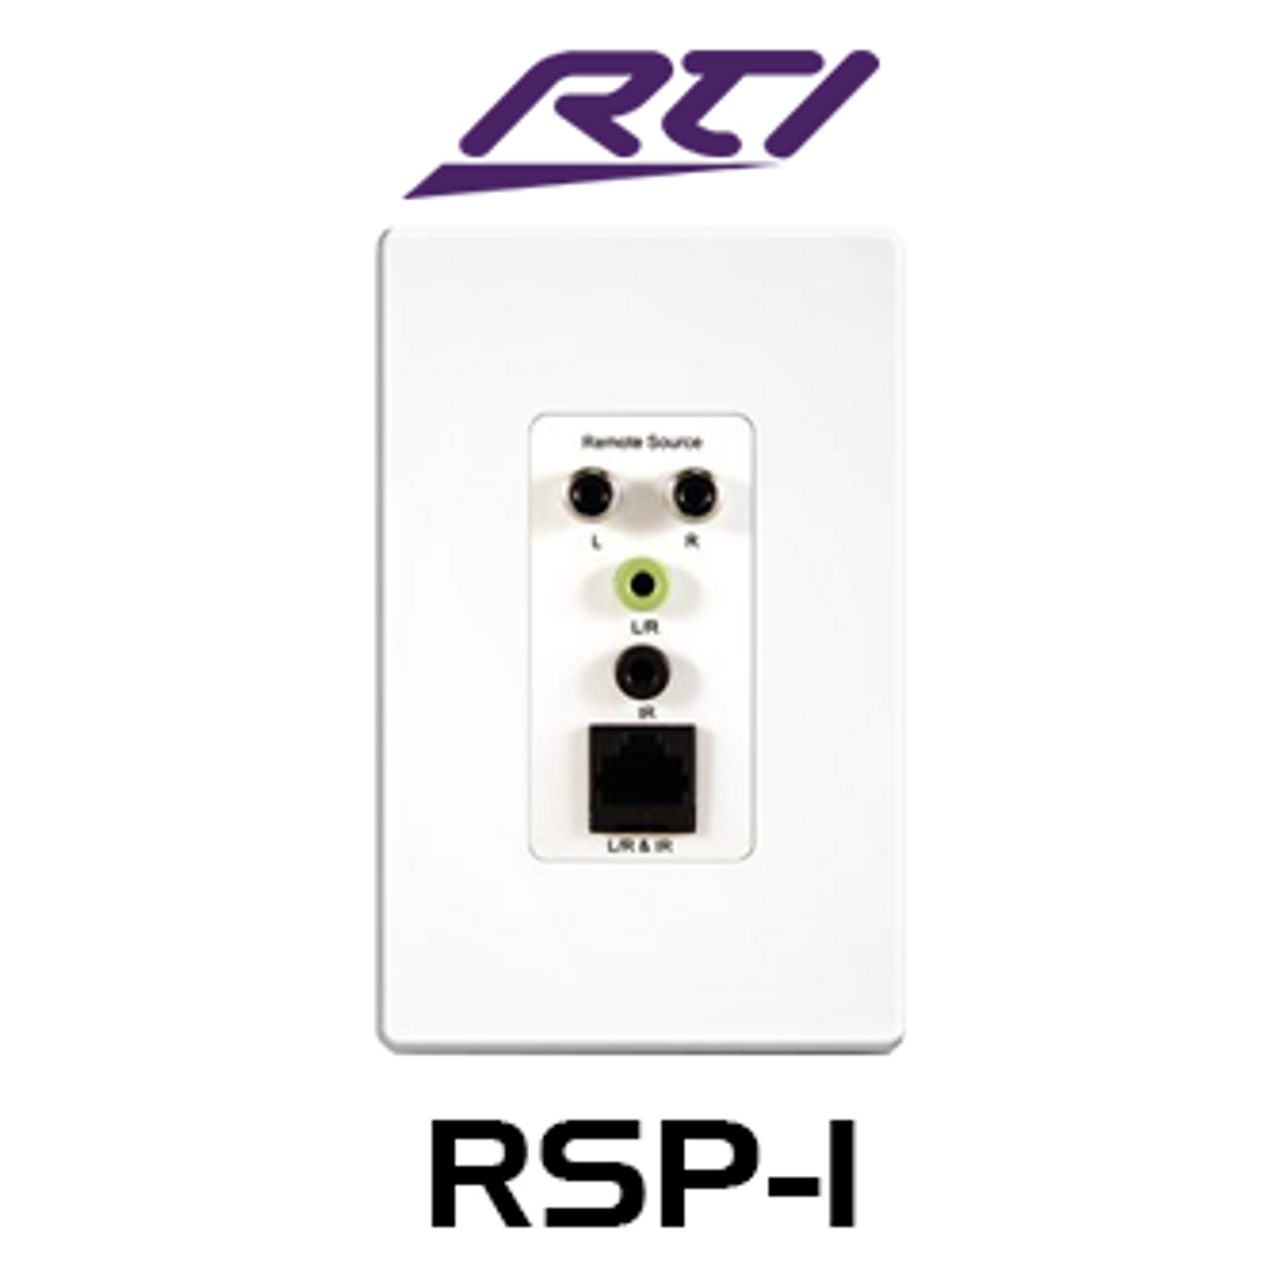 RTI RSP-1 Remote Source wallplate for AD-4x/8x/16x